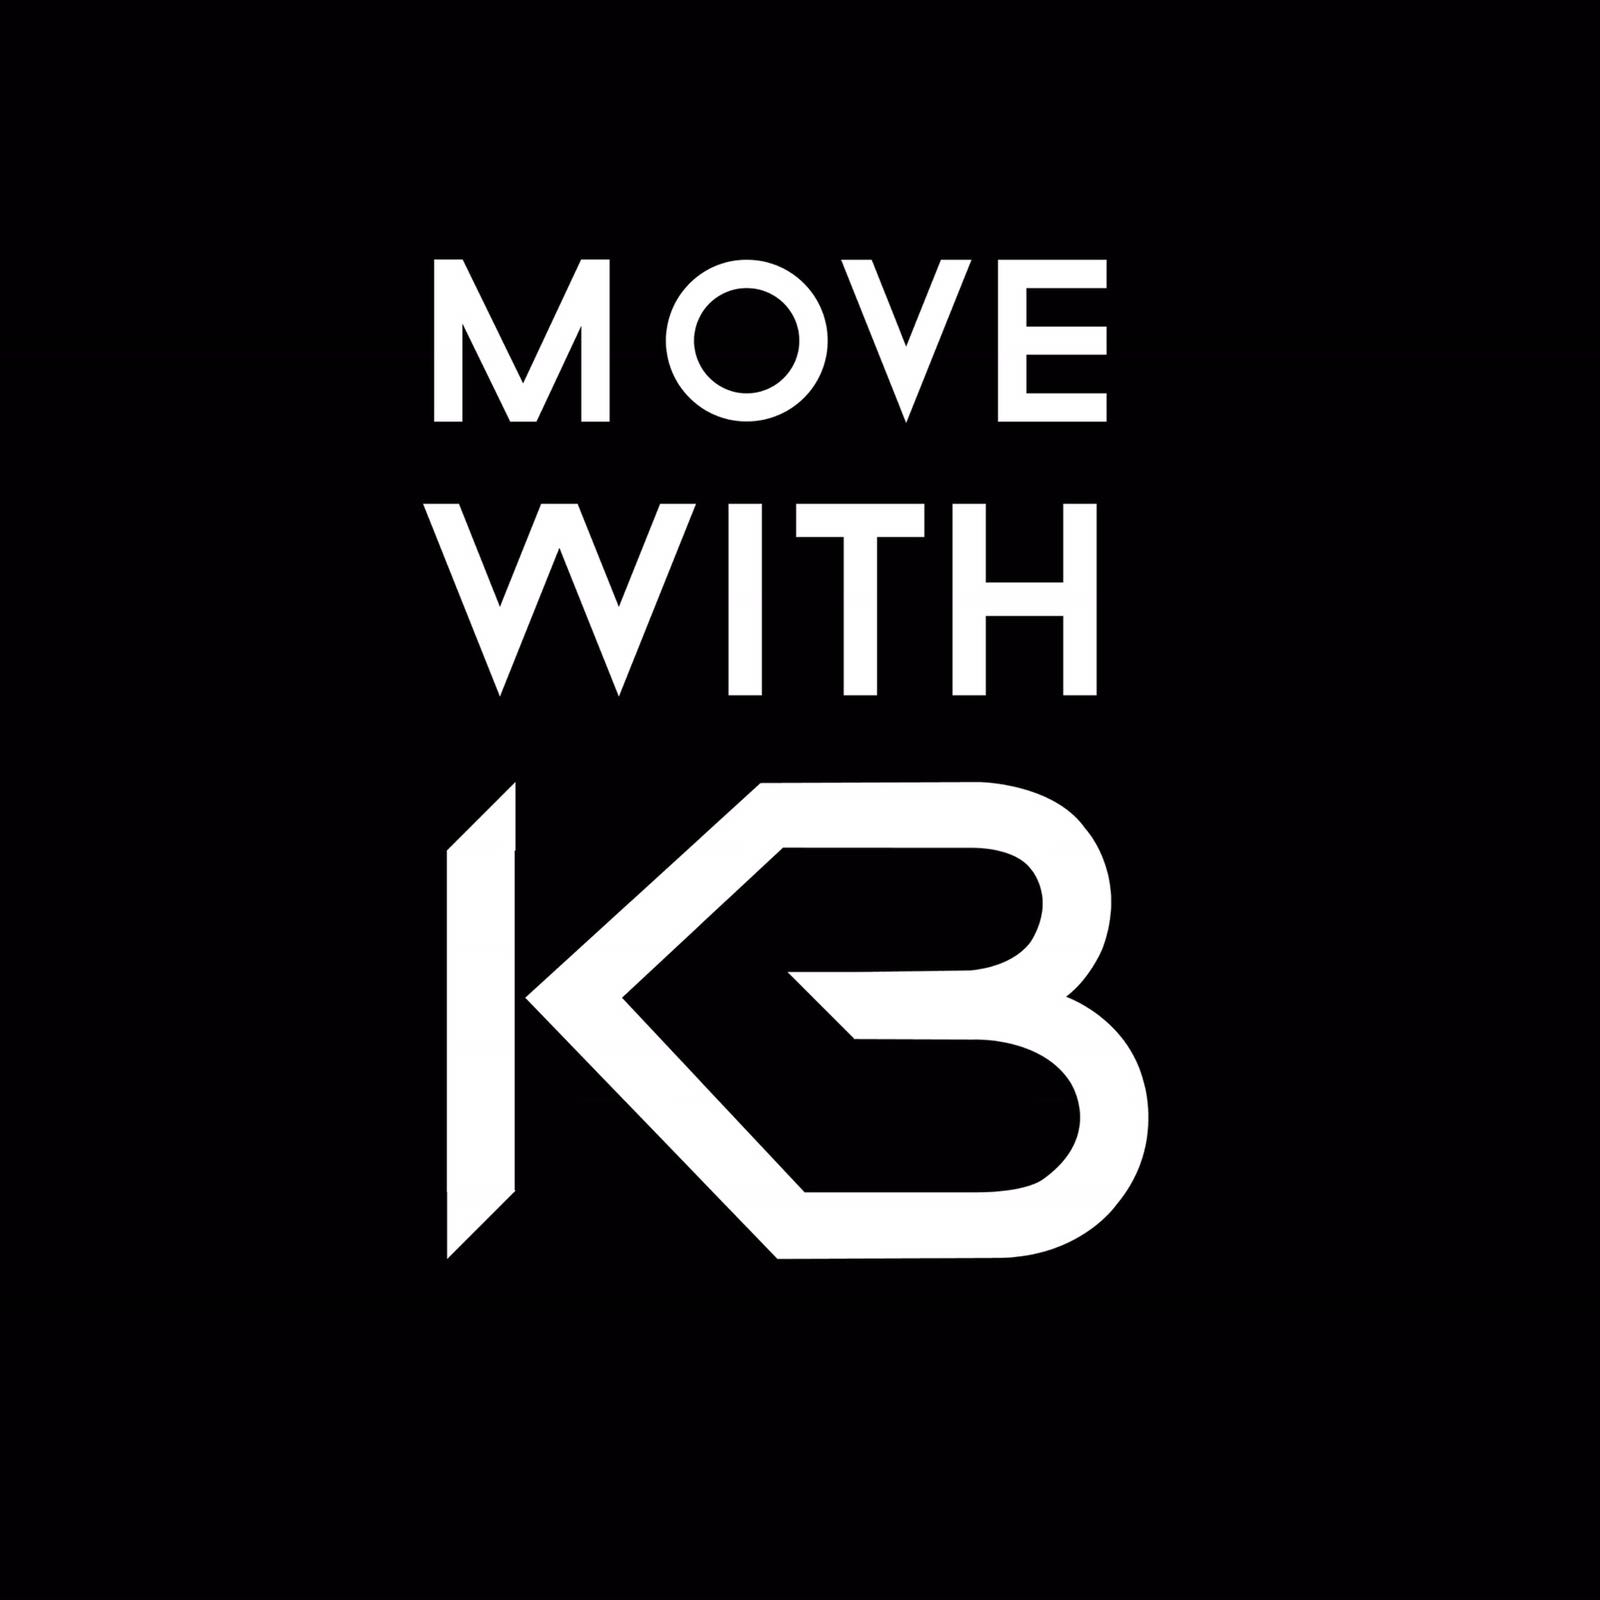 MOVE WITH KB